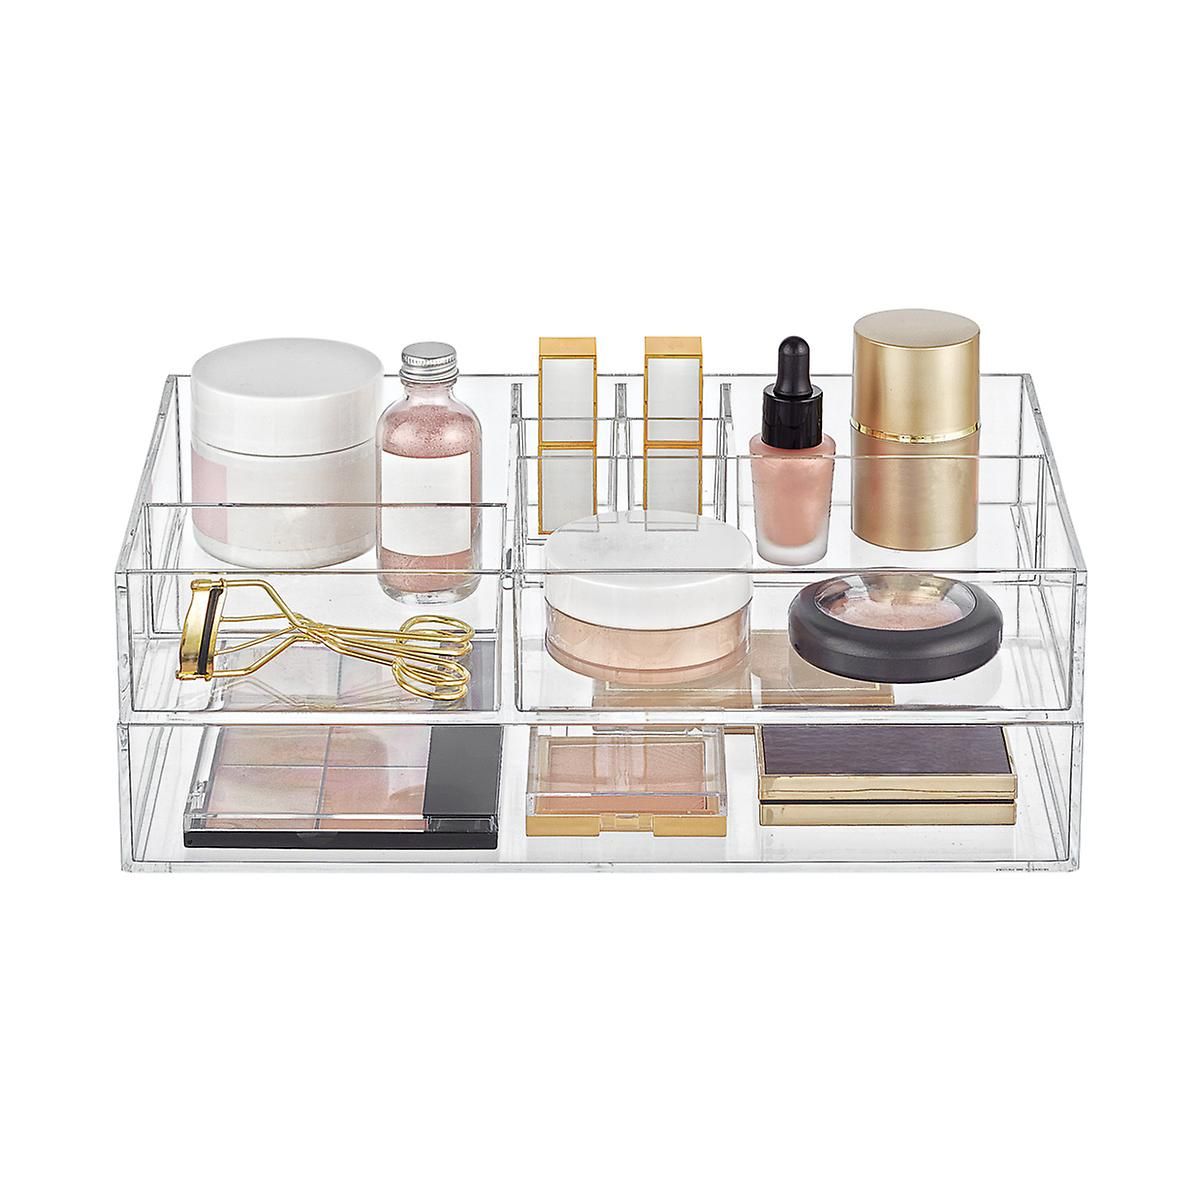 Clear Acrylic Makeup & Skin Care Storage Kit | The Container Store